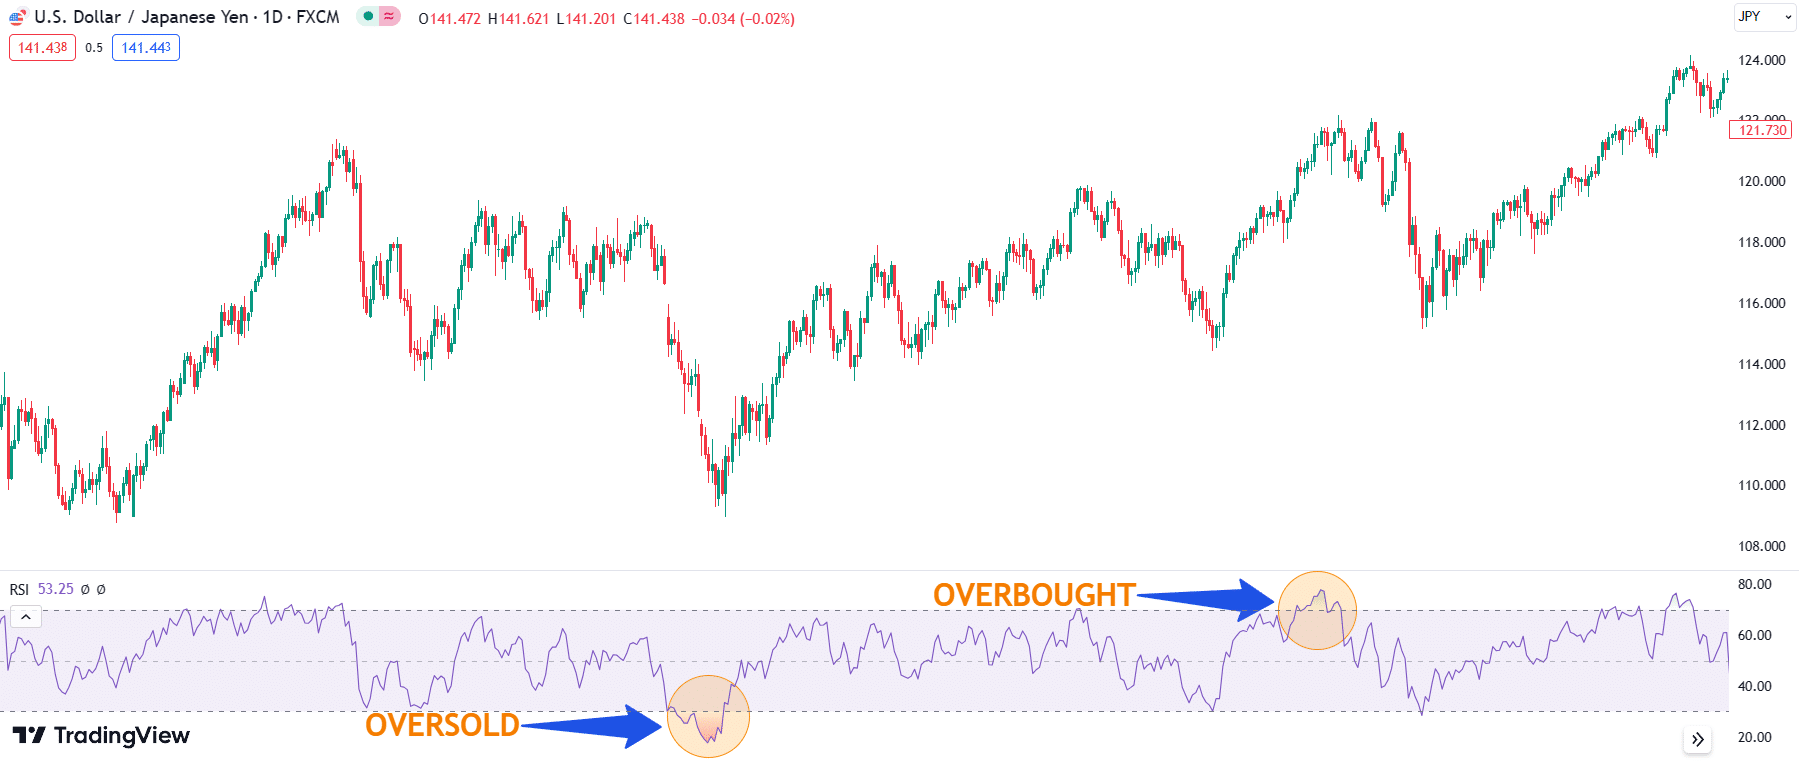 Overbought Oversold Levels in USD/JPY Chart by TradingView